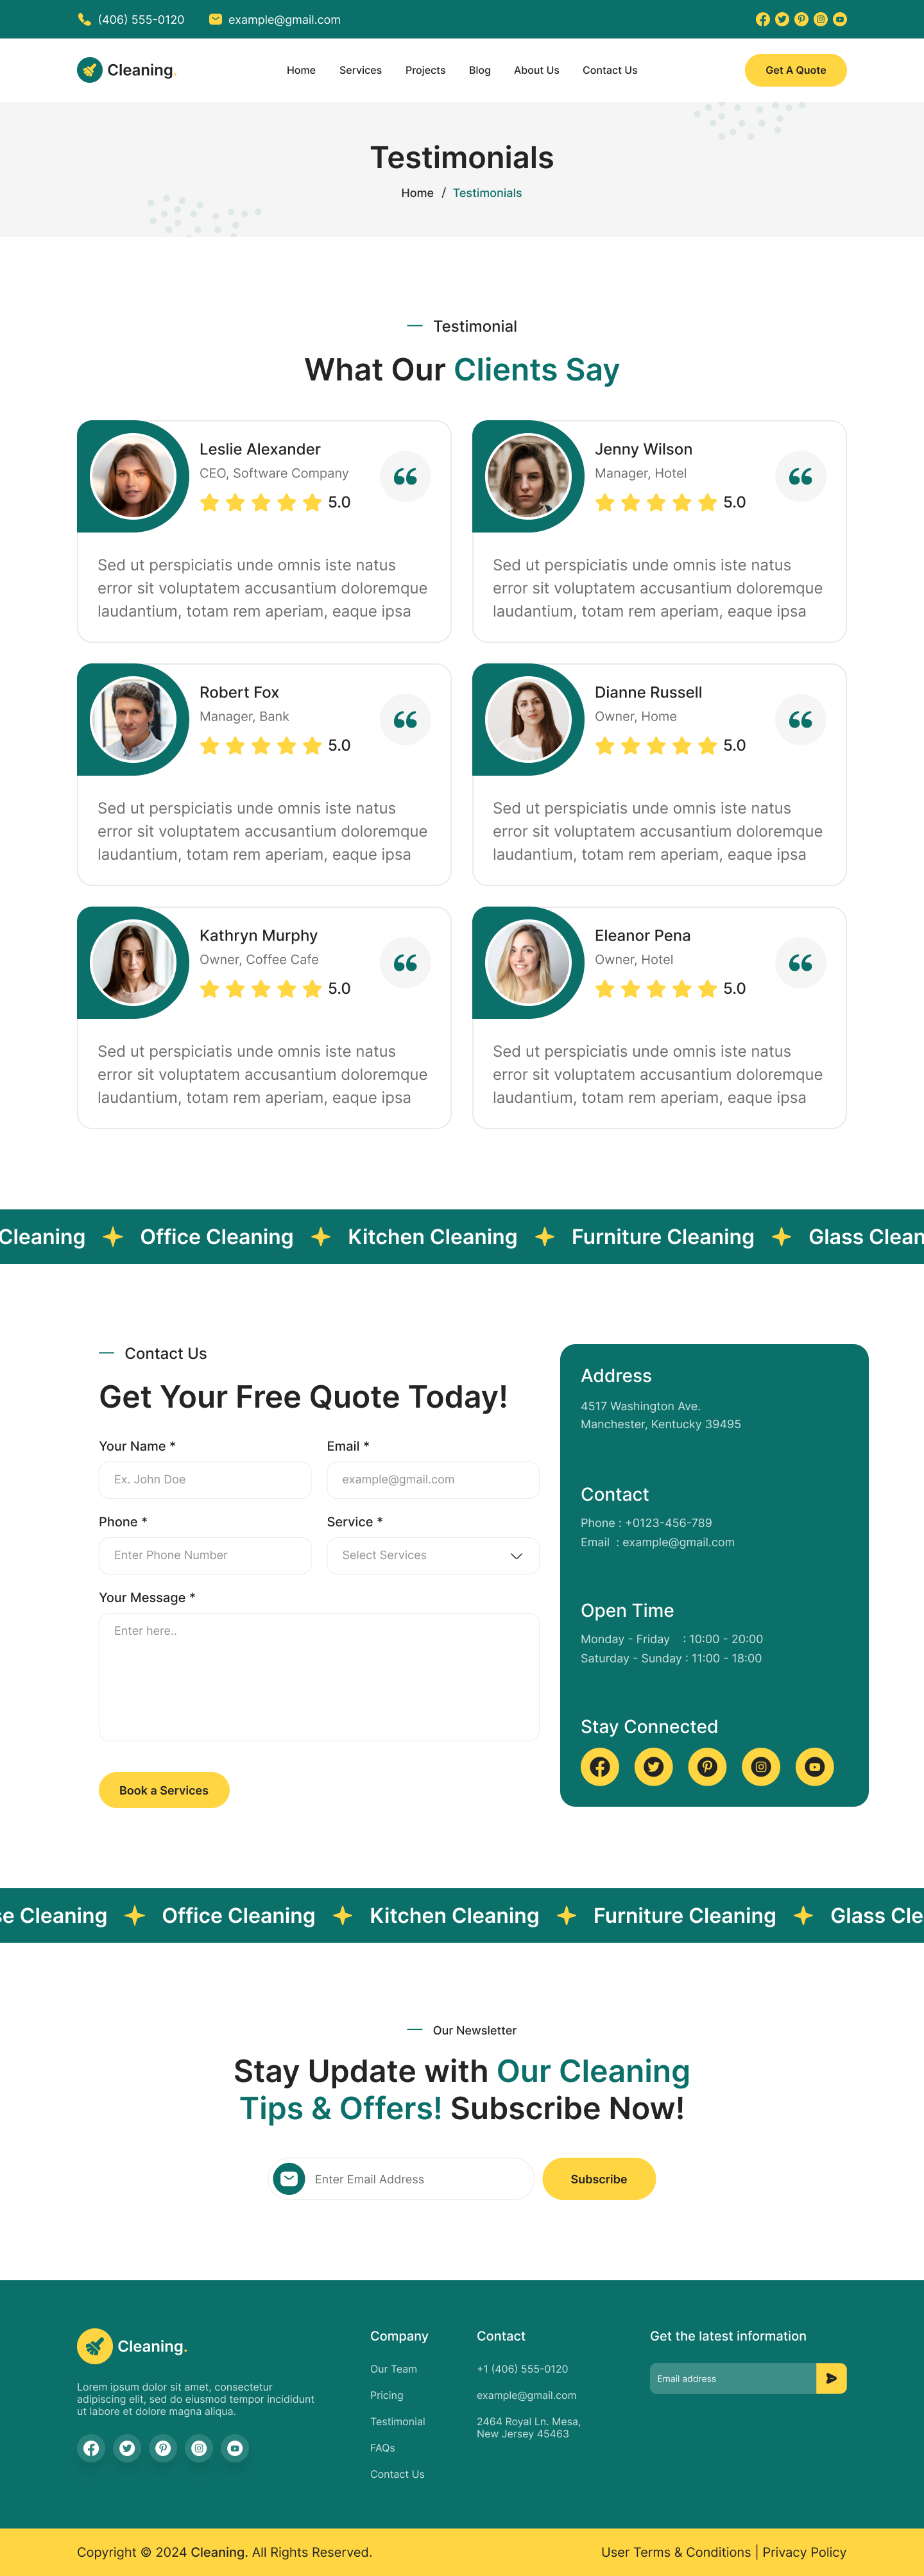 cleaning service website Testimonials Page figma design